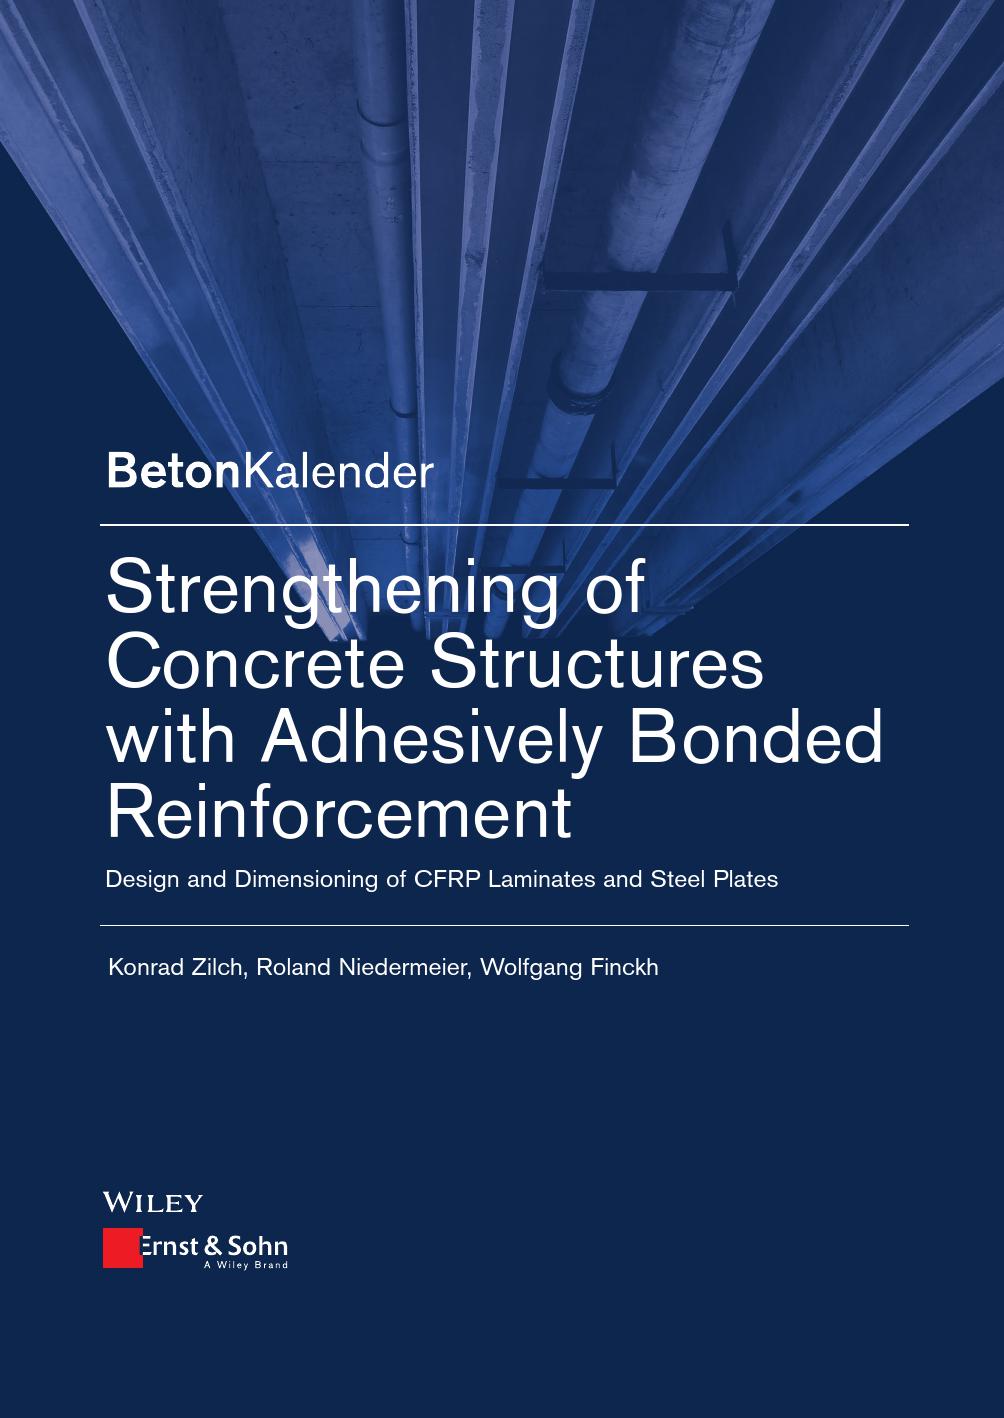 Strengthening-of-Concrete-Structures-with-Adhesively-Bonded-Reinforcement